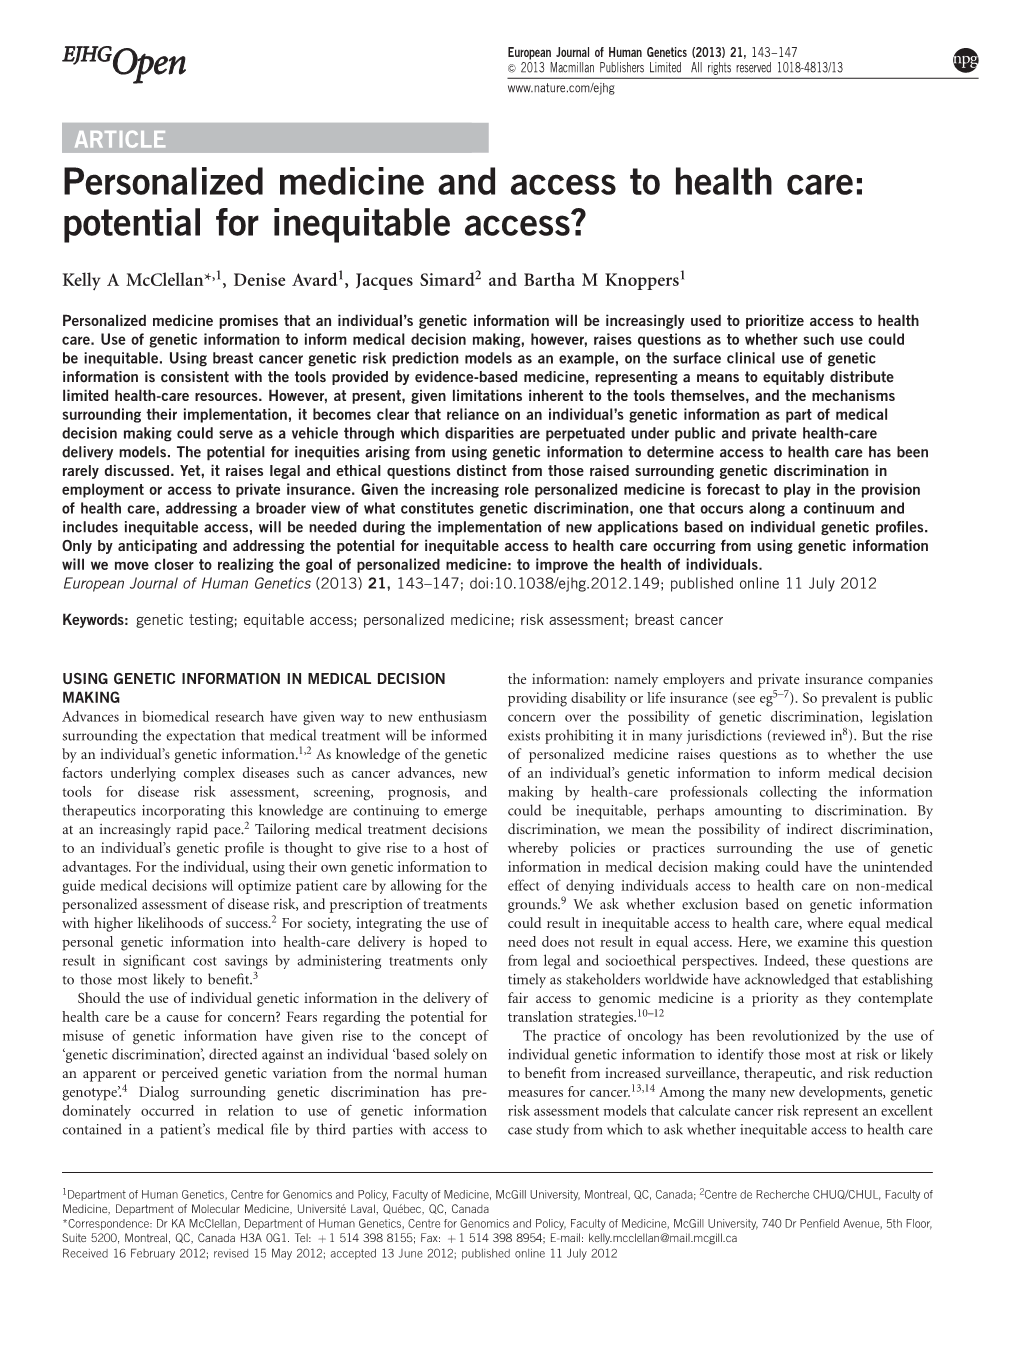 Personalized Medicine and Access to Health Care: Potential for Inequitable Access?